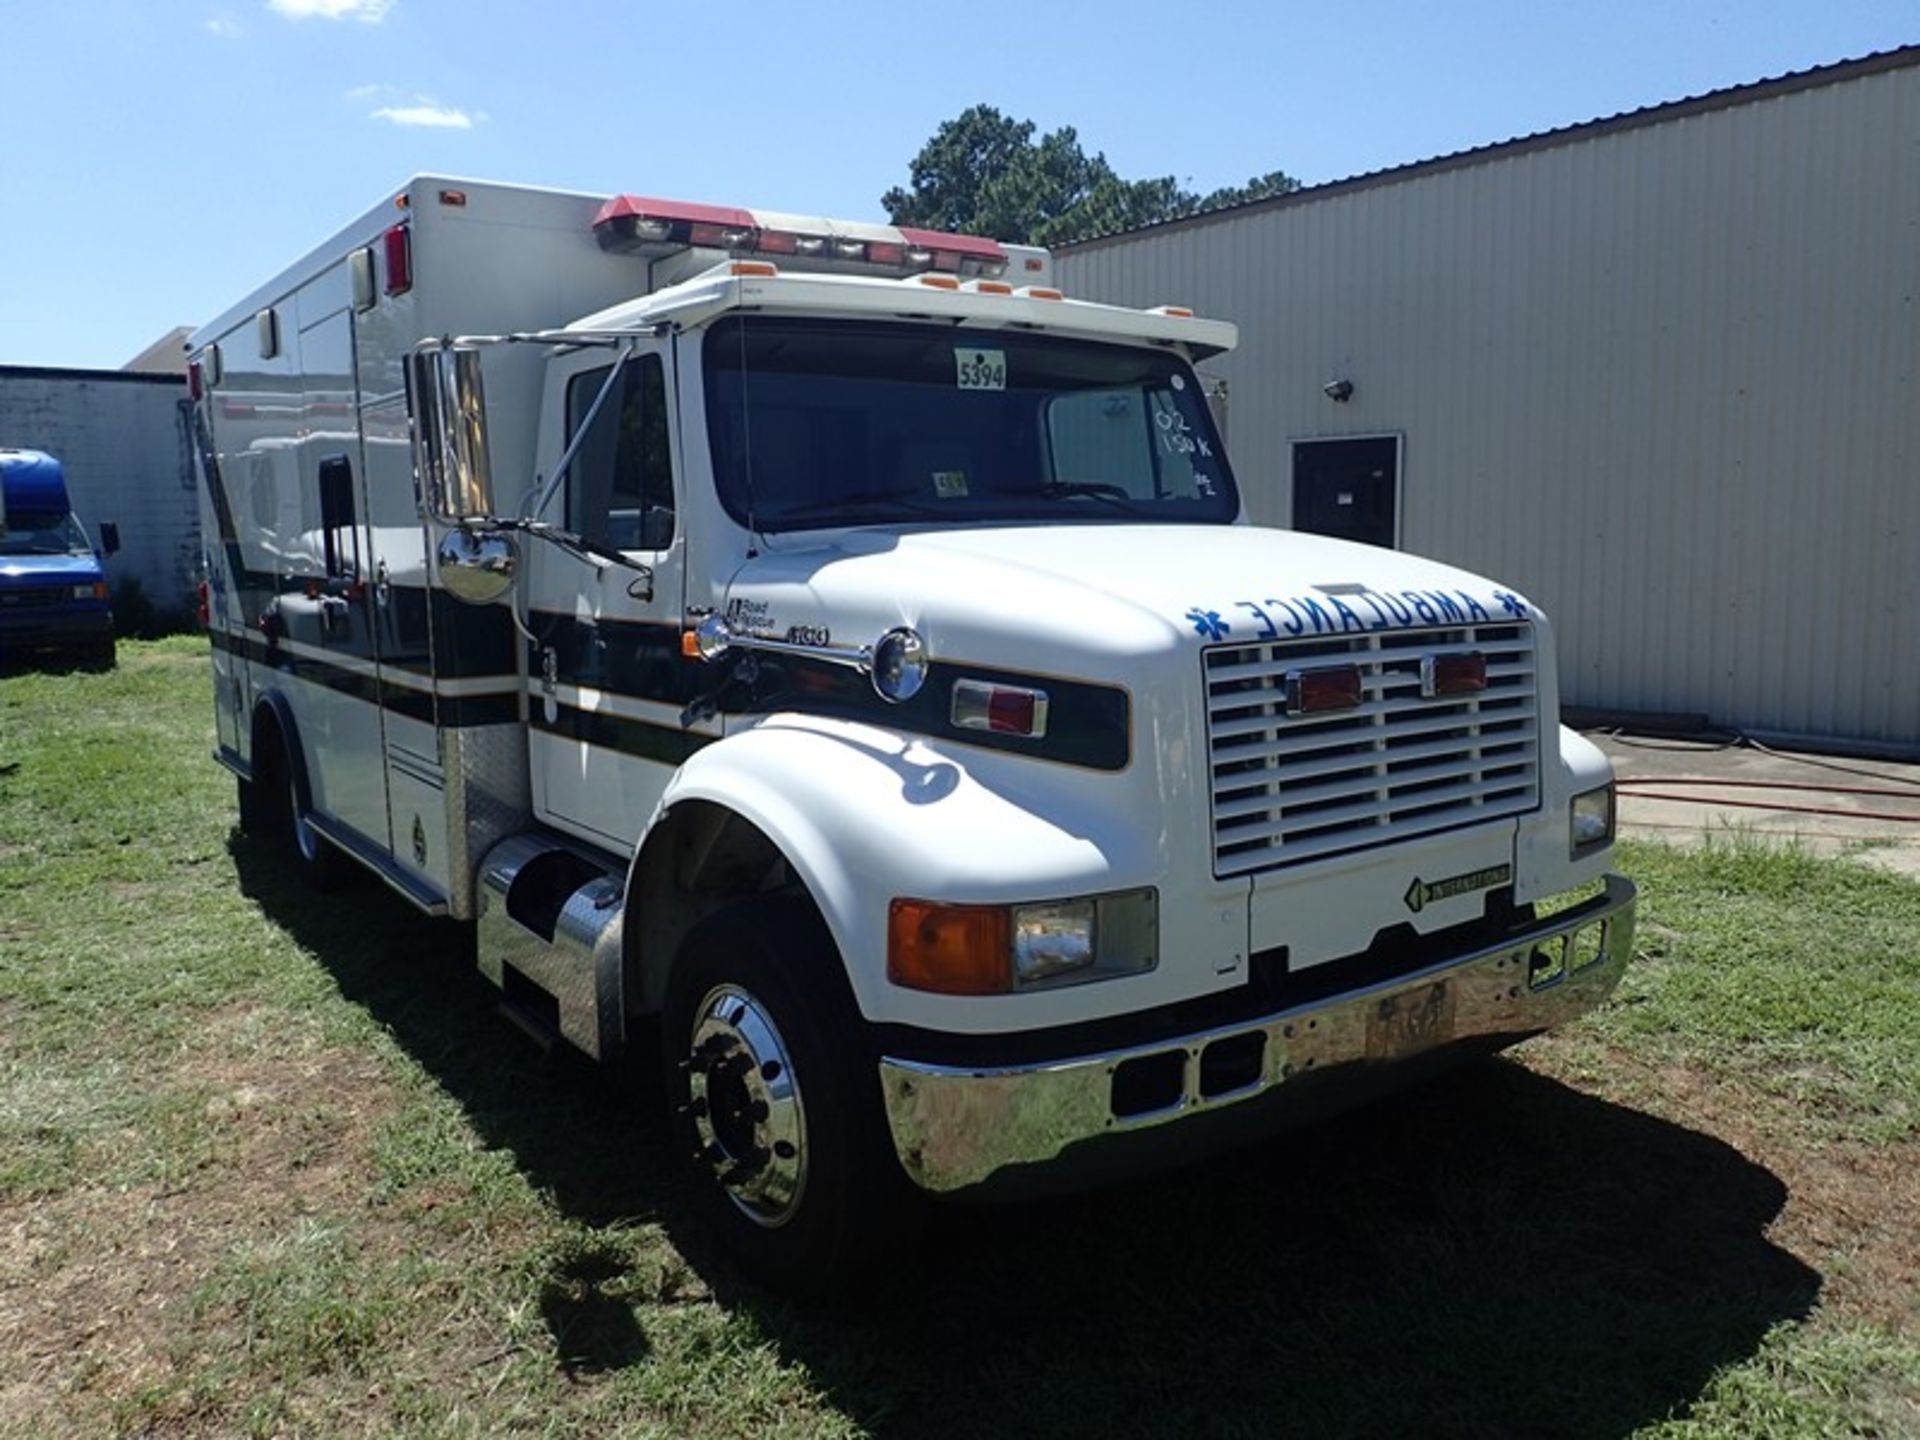 2000 International 4700 Type I Amb DT466E Road Rescue body vin #1HTSLAAMXYH201590 150,330 miles - Image 2 of 6